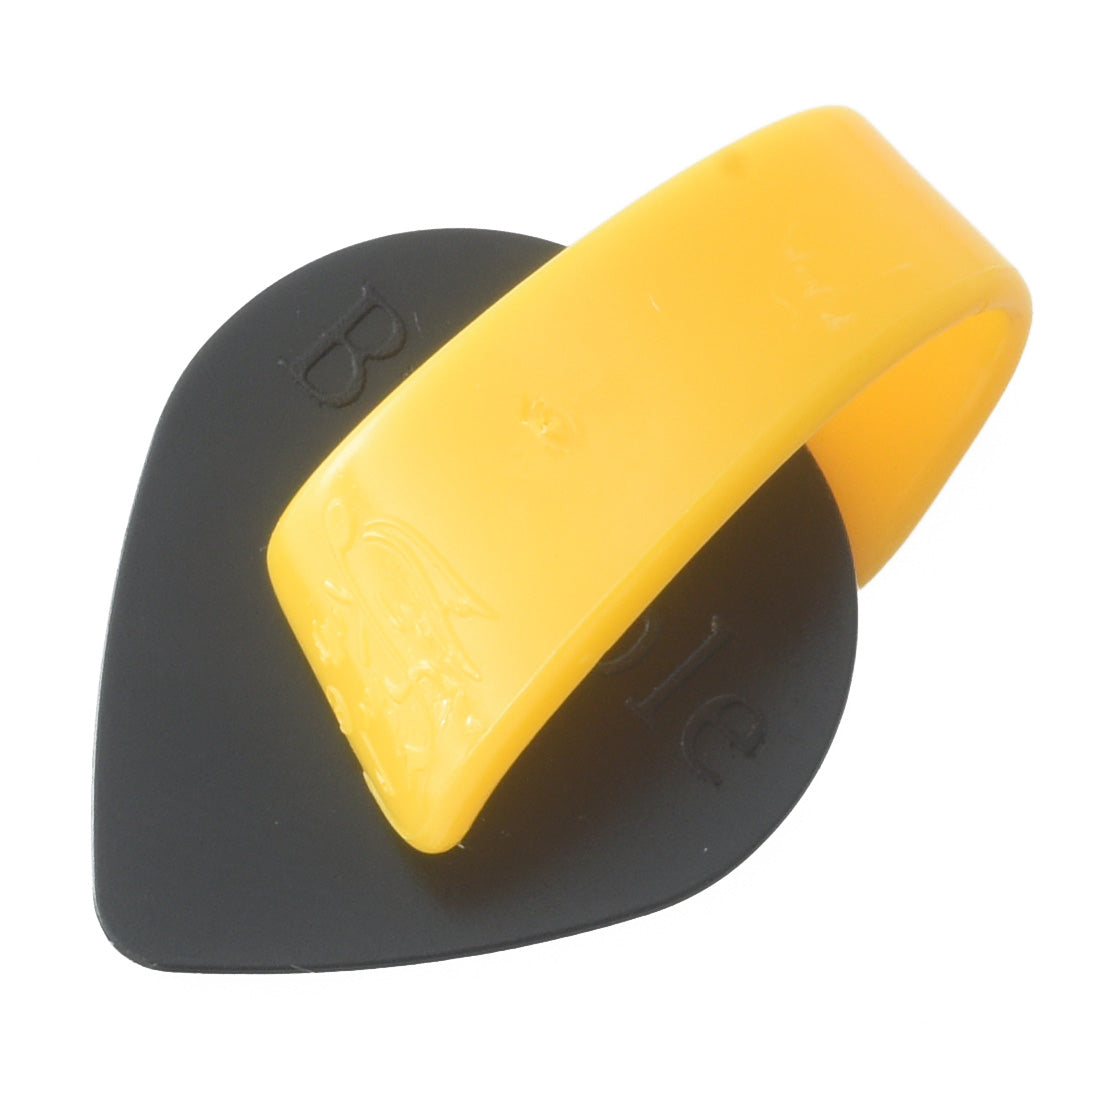 Image 3 of Fred Kelly Delrin Extra-Heavy Gauge Bumble Bee Jazz Pick - SKU# PKBBJ-XH : Product Type Accessories & Parts : Elderly Instruments